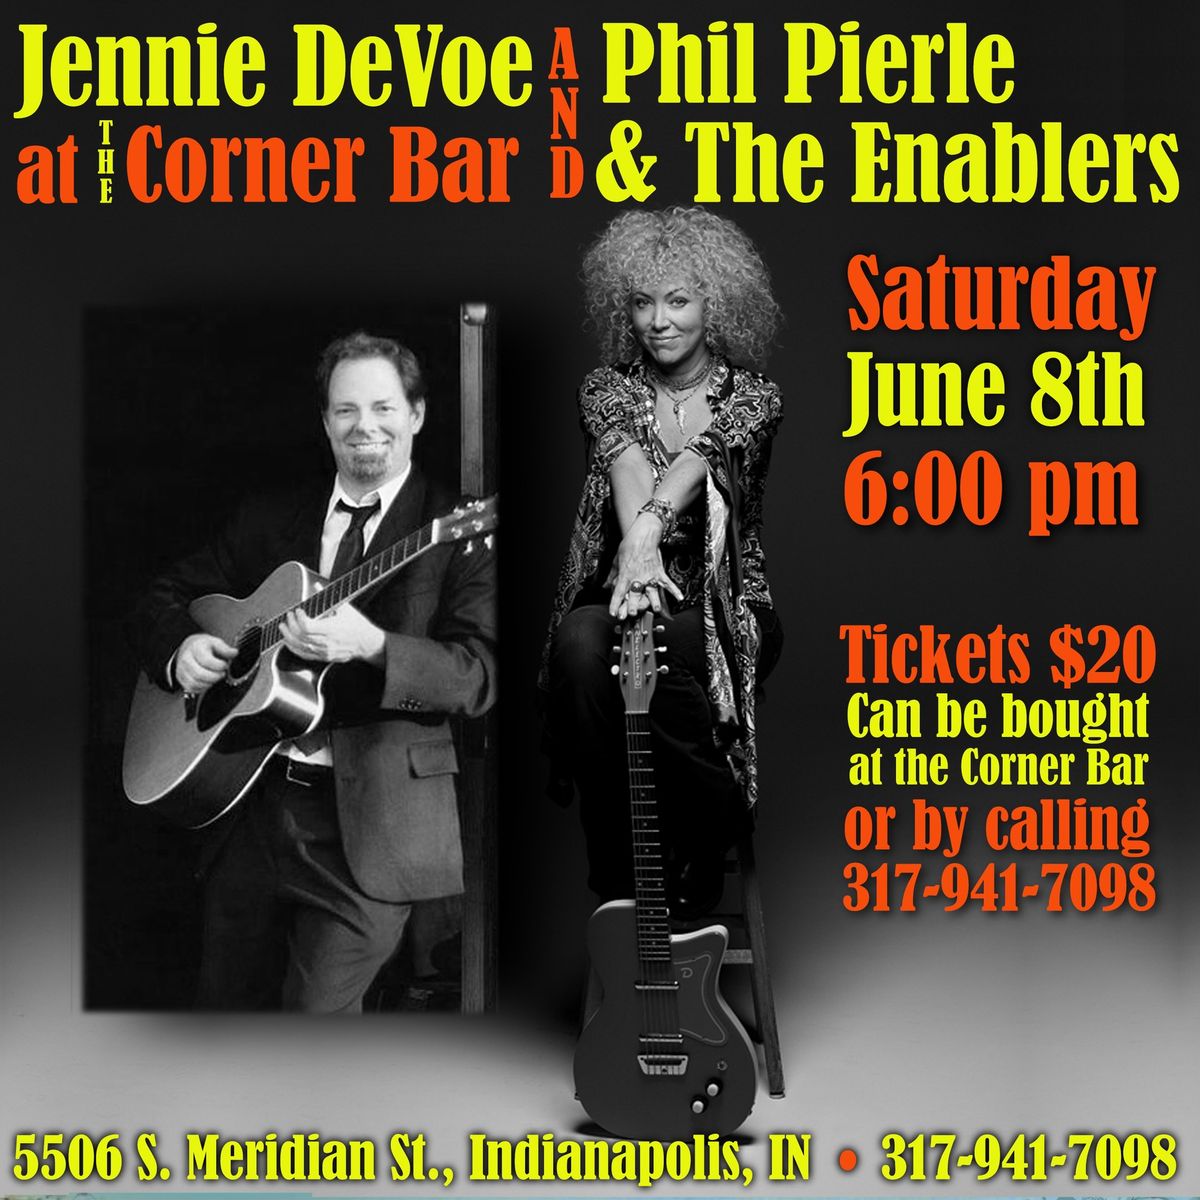 Jennie DeVoe and Phil Pierle & The Enablers at The Corner Bar